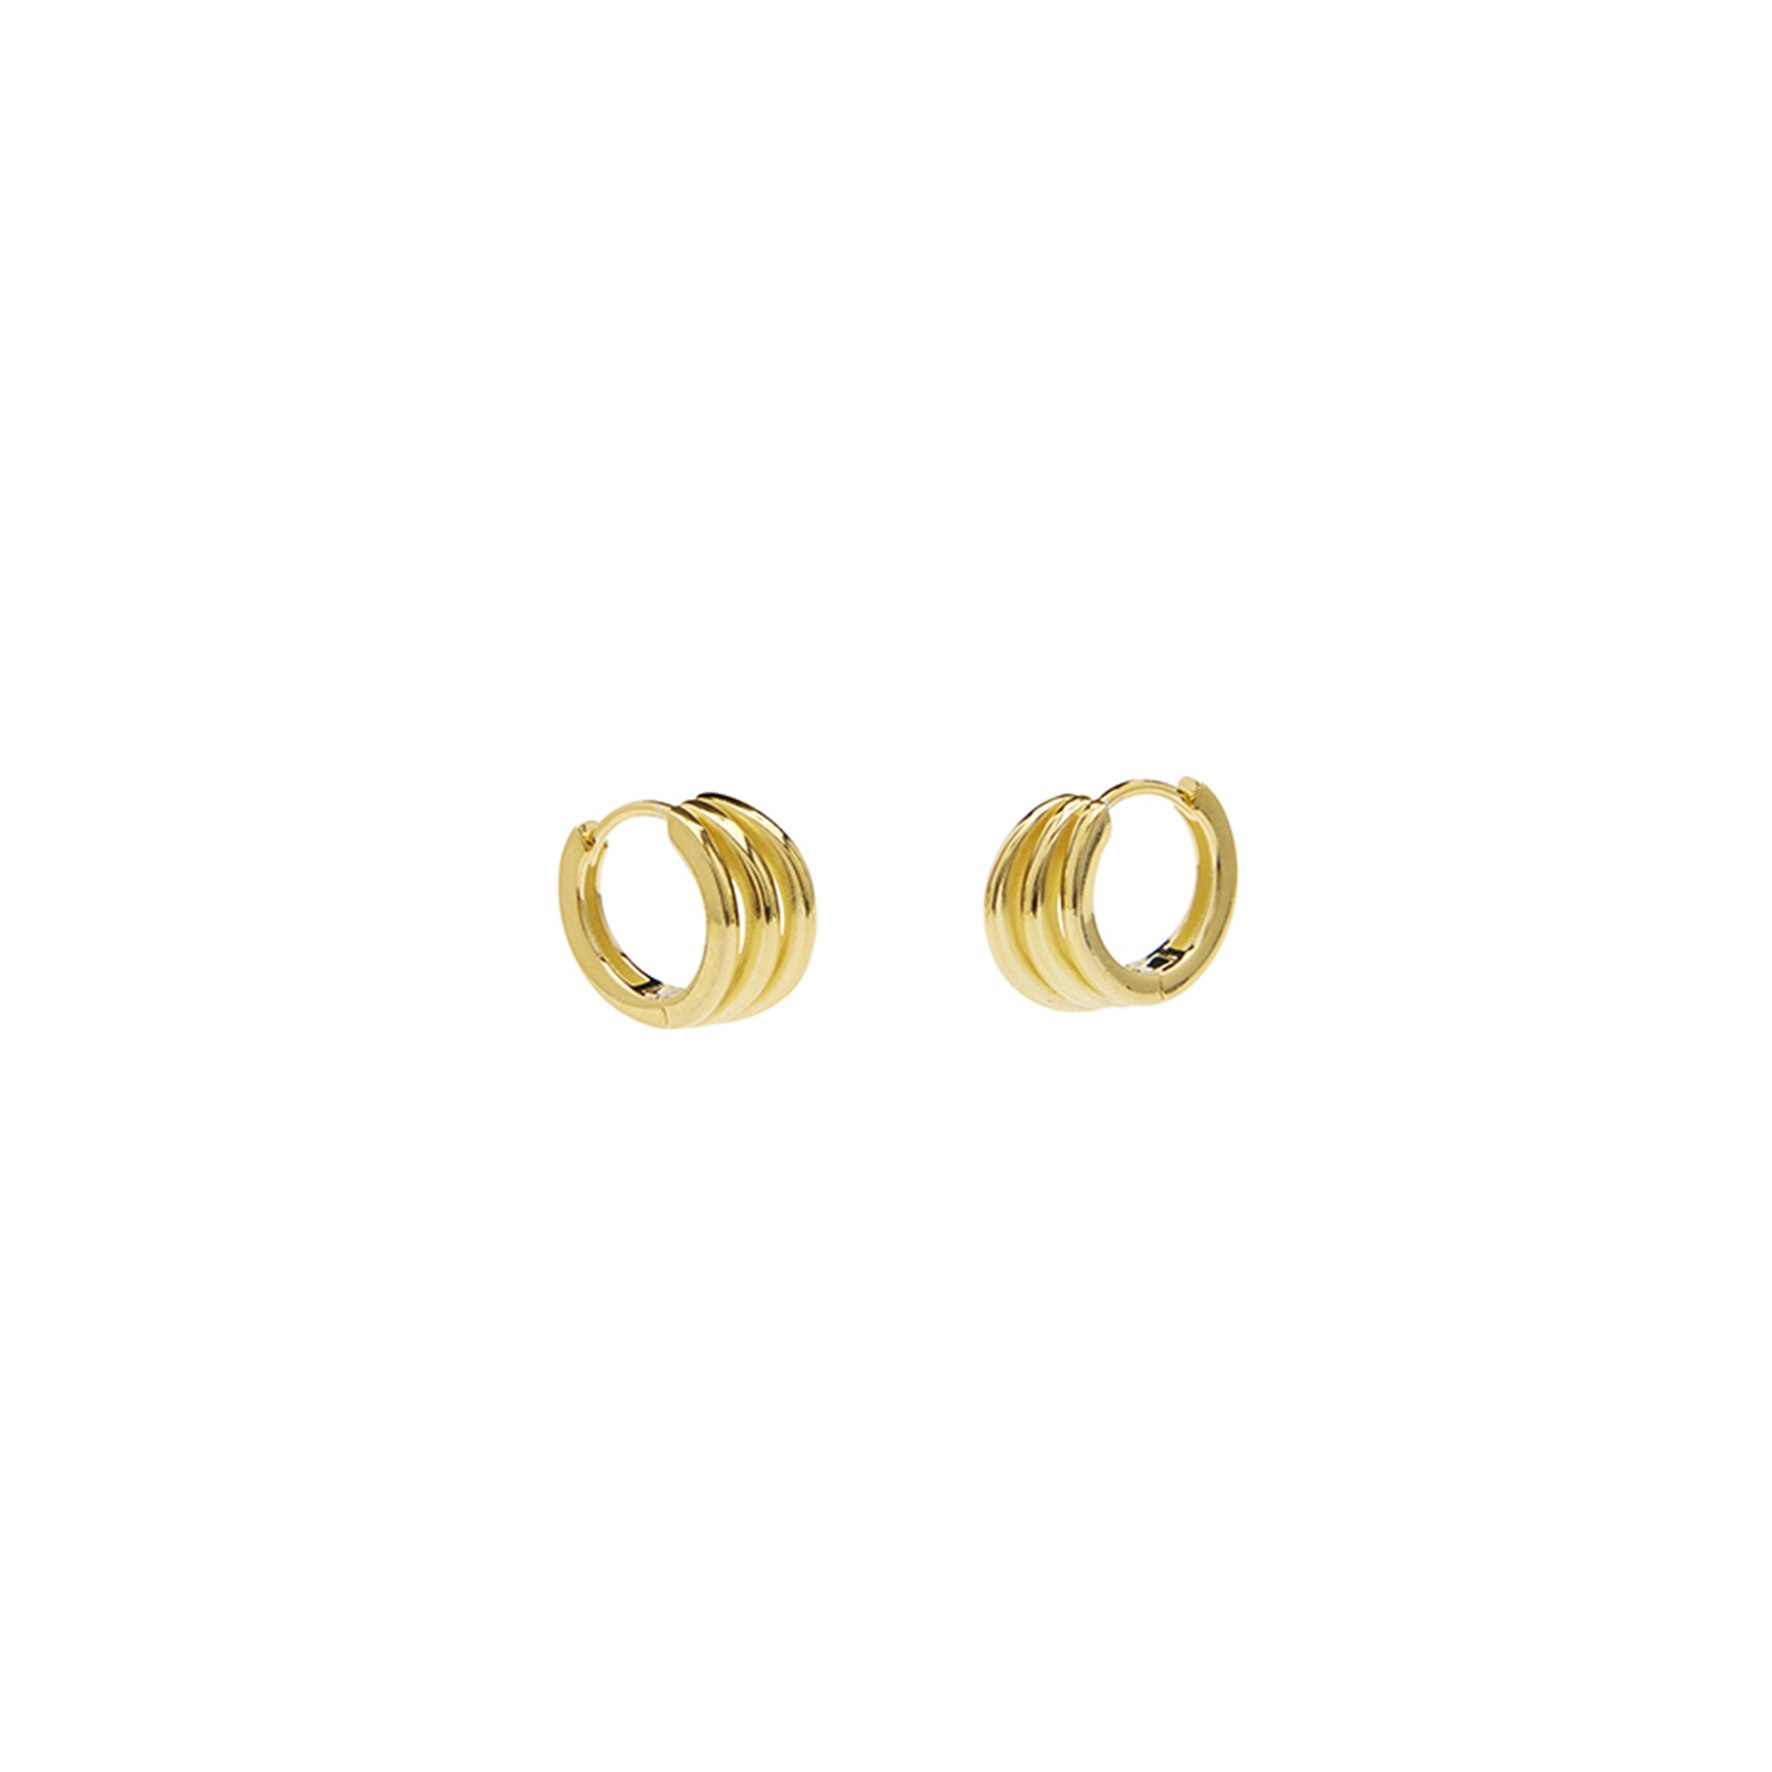 Billie Hoops from Pico in Goldplated-Silver Sterling 925